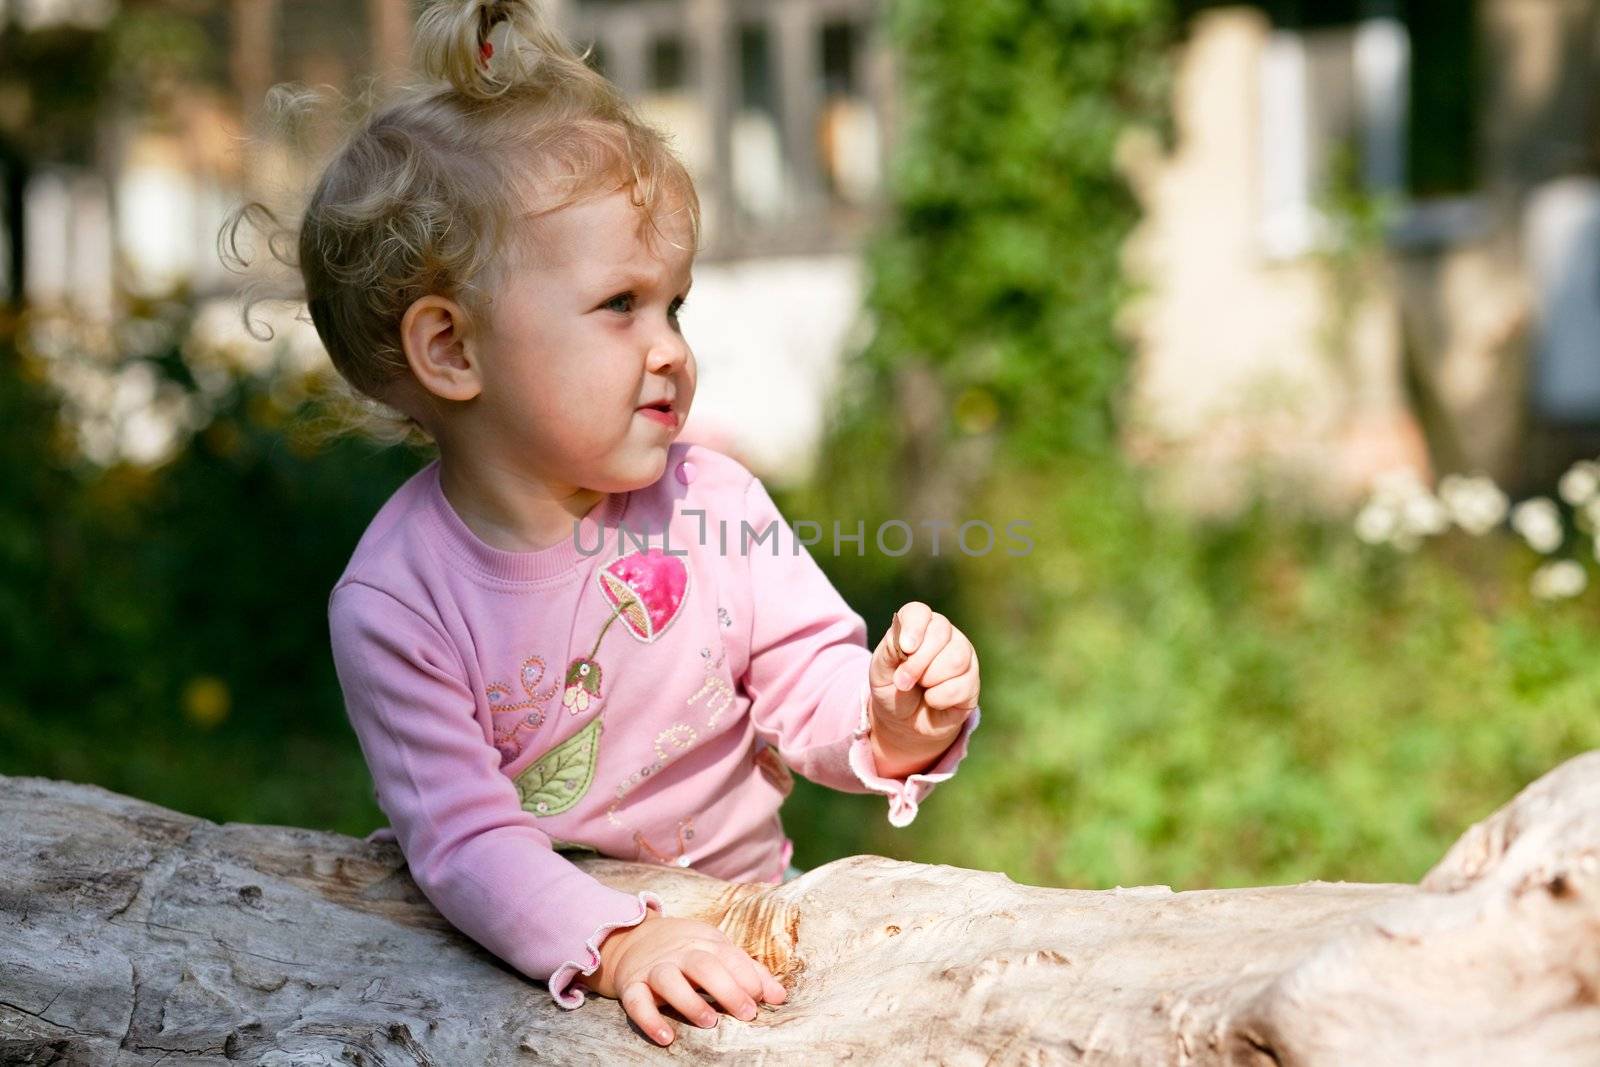 An image of little baby-girl playing outdoor